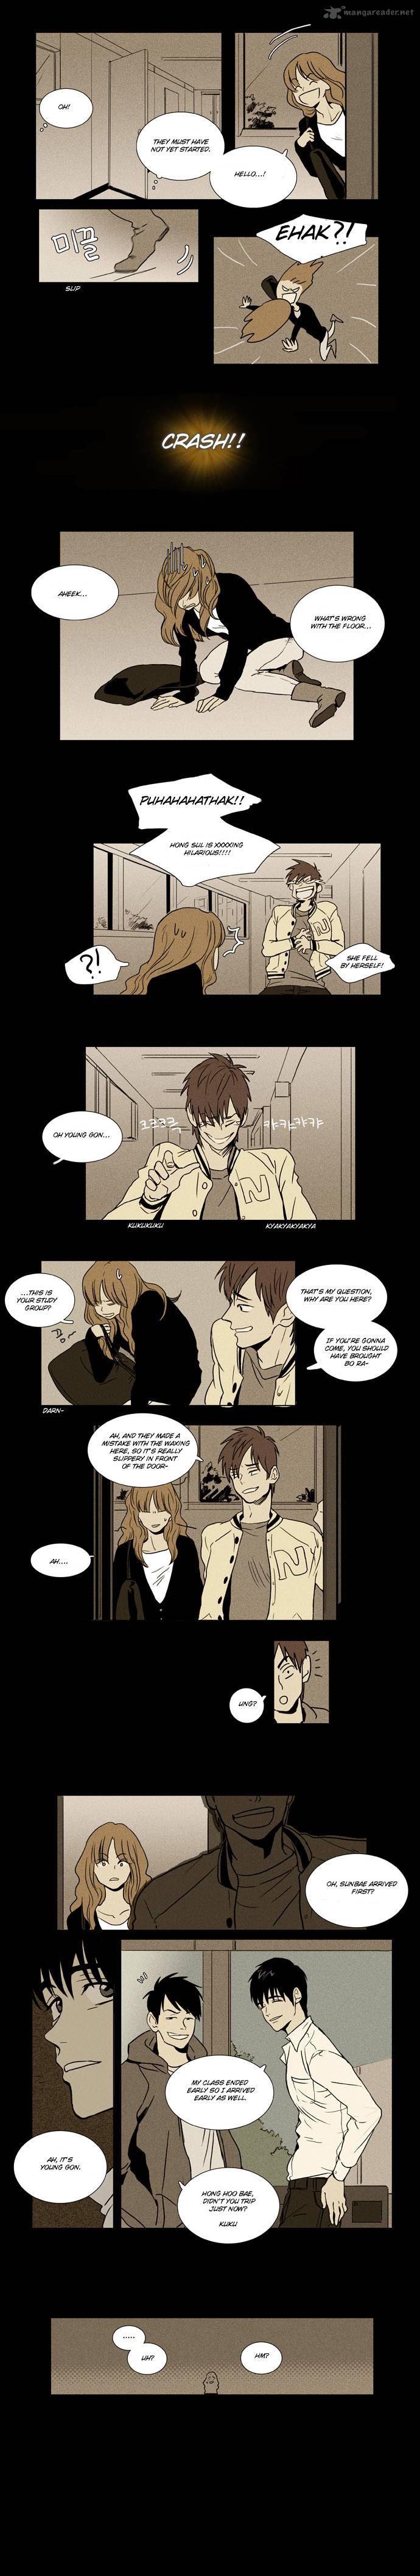 Cheese In The Trap 7 2